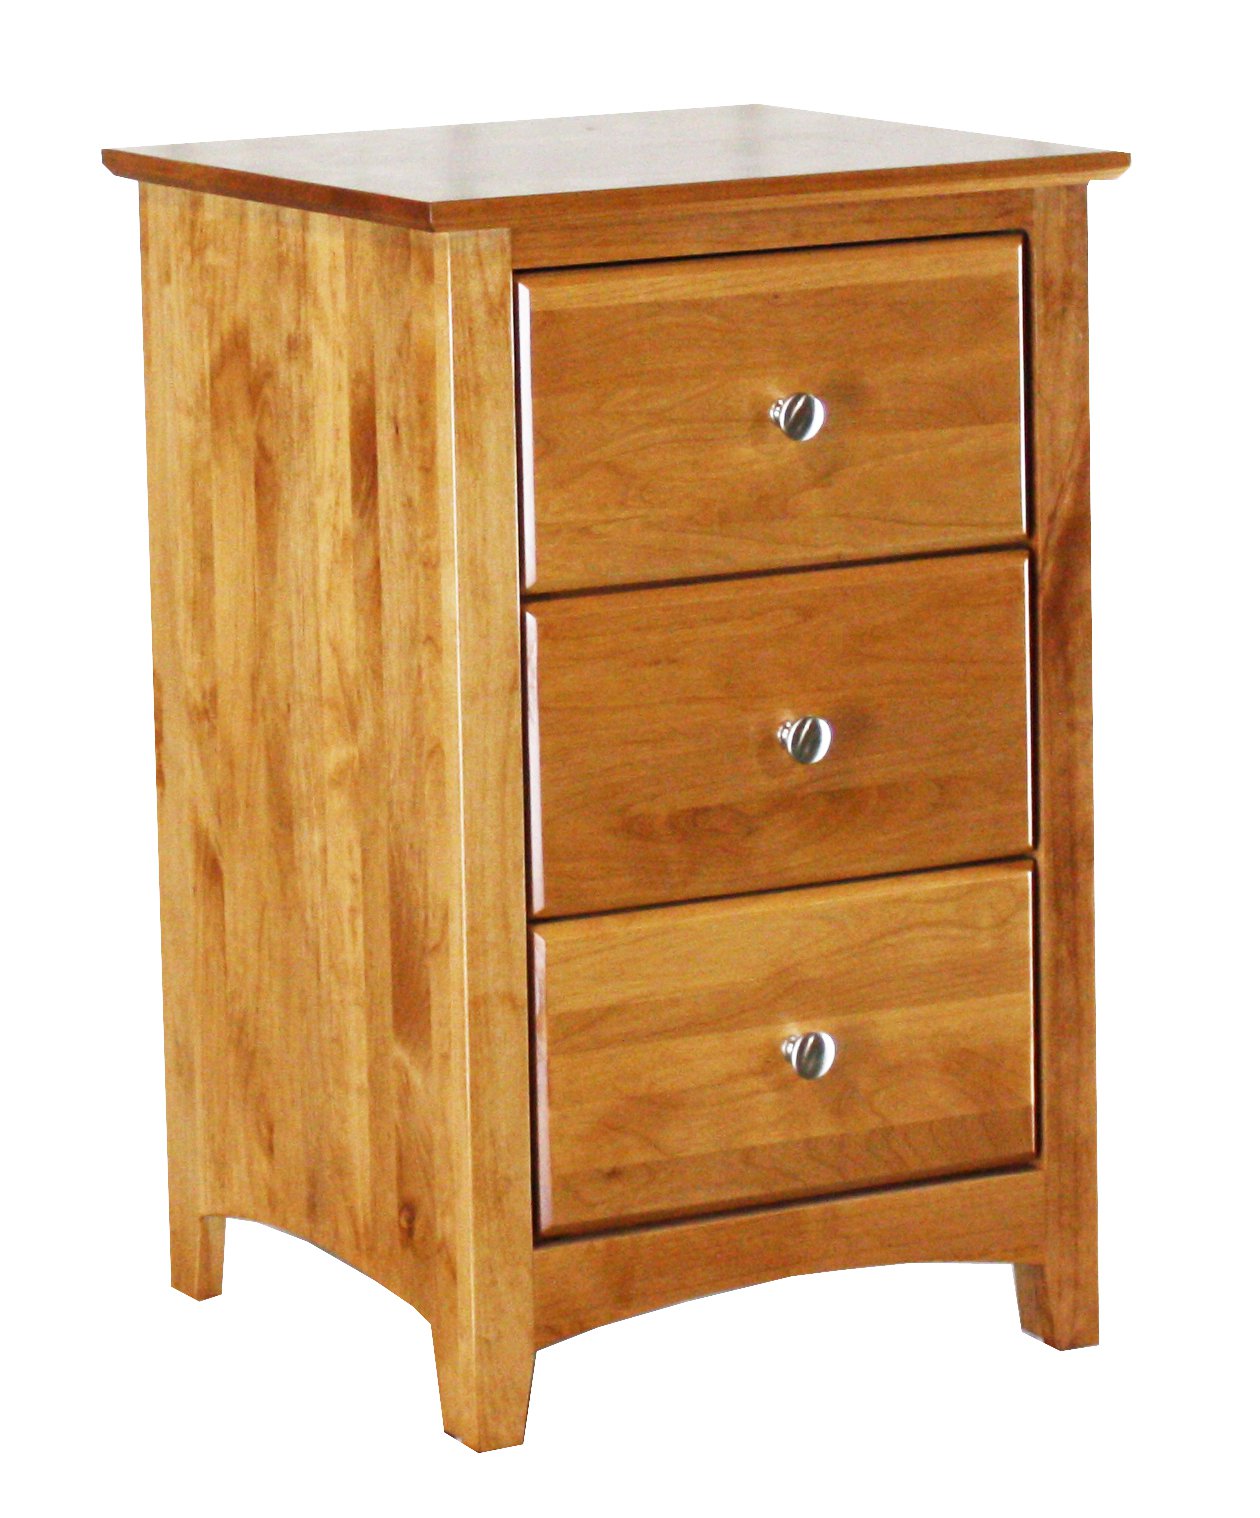 [19 Inch] Alder Shaker 3 Drawer Nightstand - shown in Honey finish with Brushed Nickel knobs